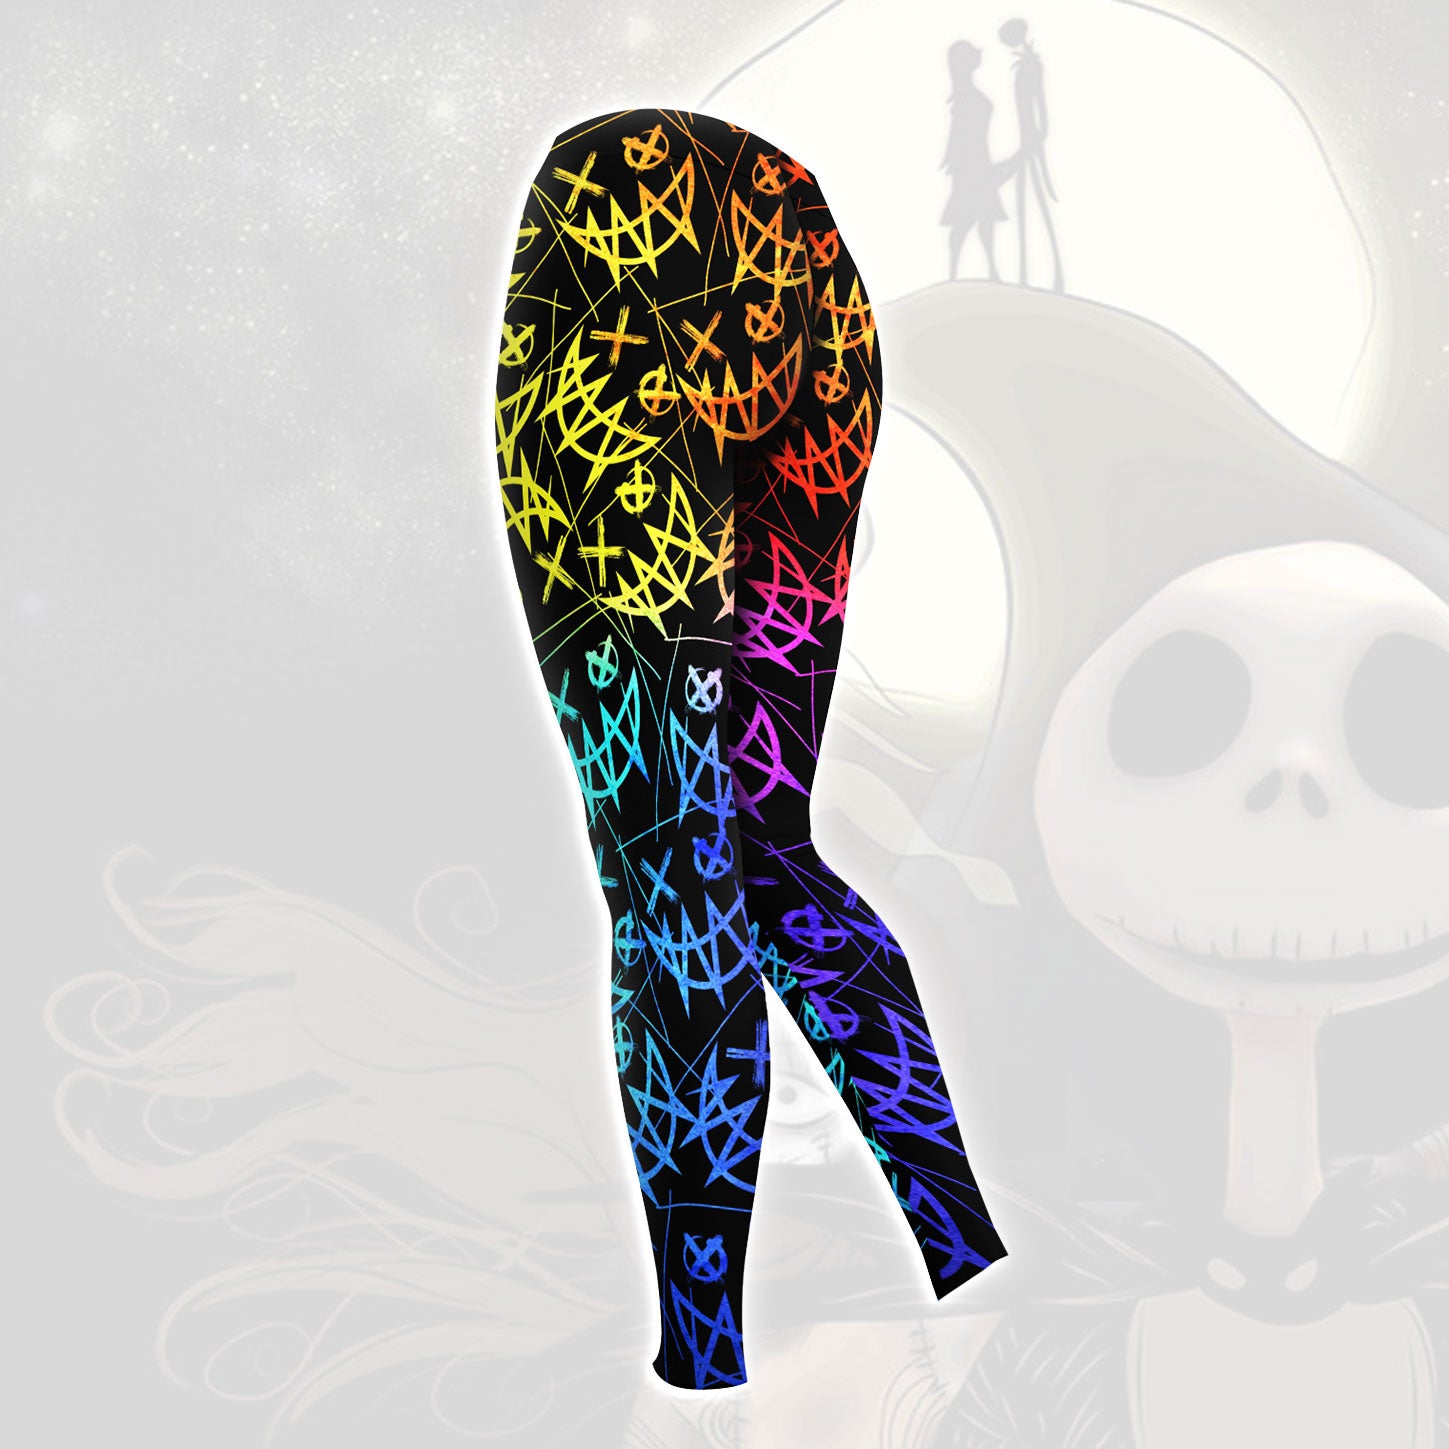 Rainbow Emo Pattern Combo Hoodie and Leggings - Dark and edgy matching set with skull designs for a unique and stylish look